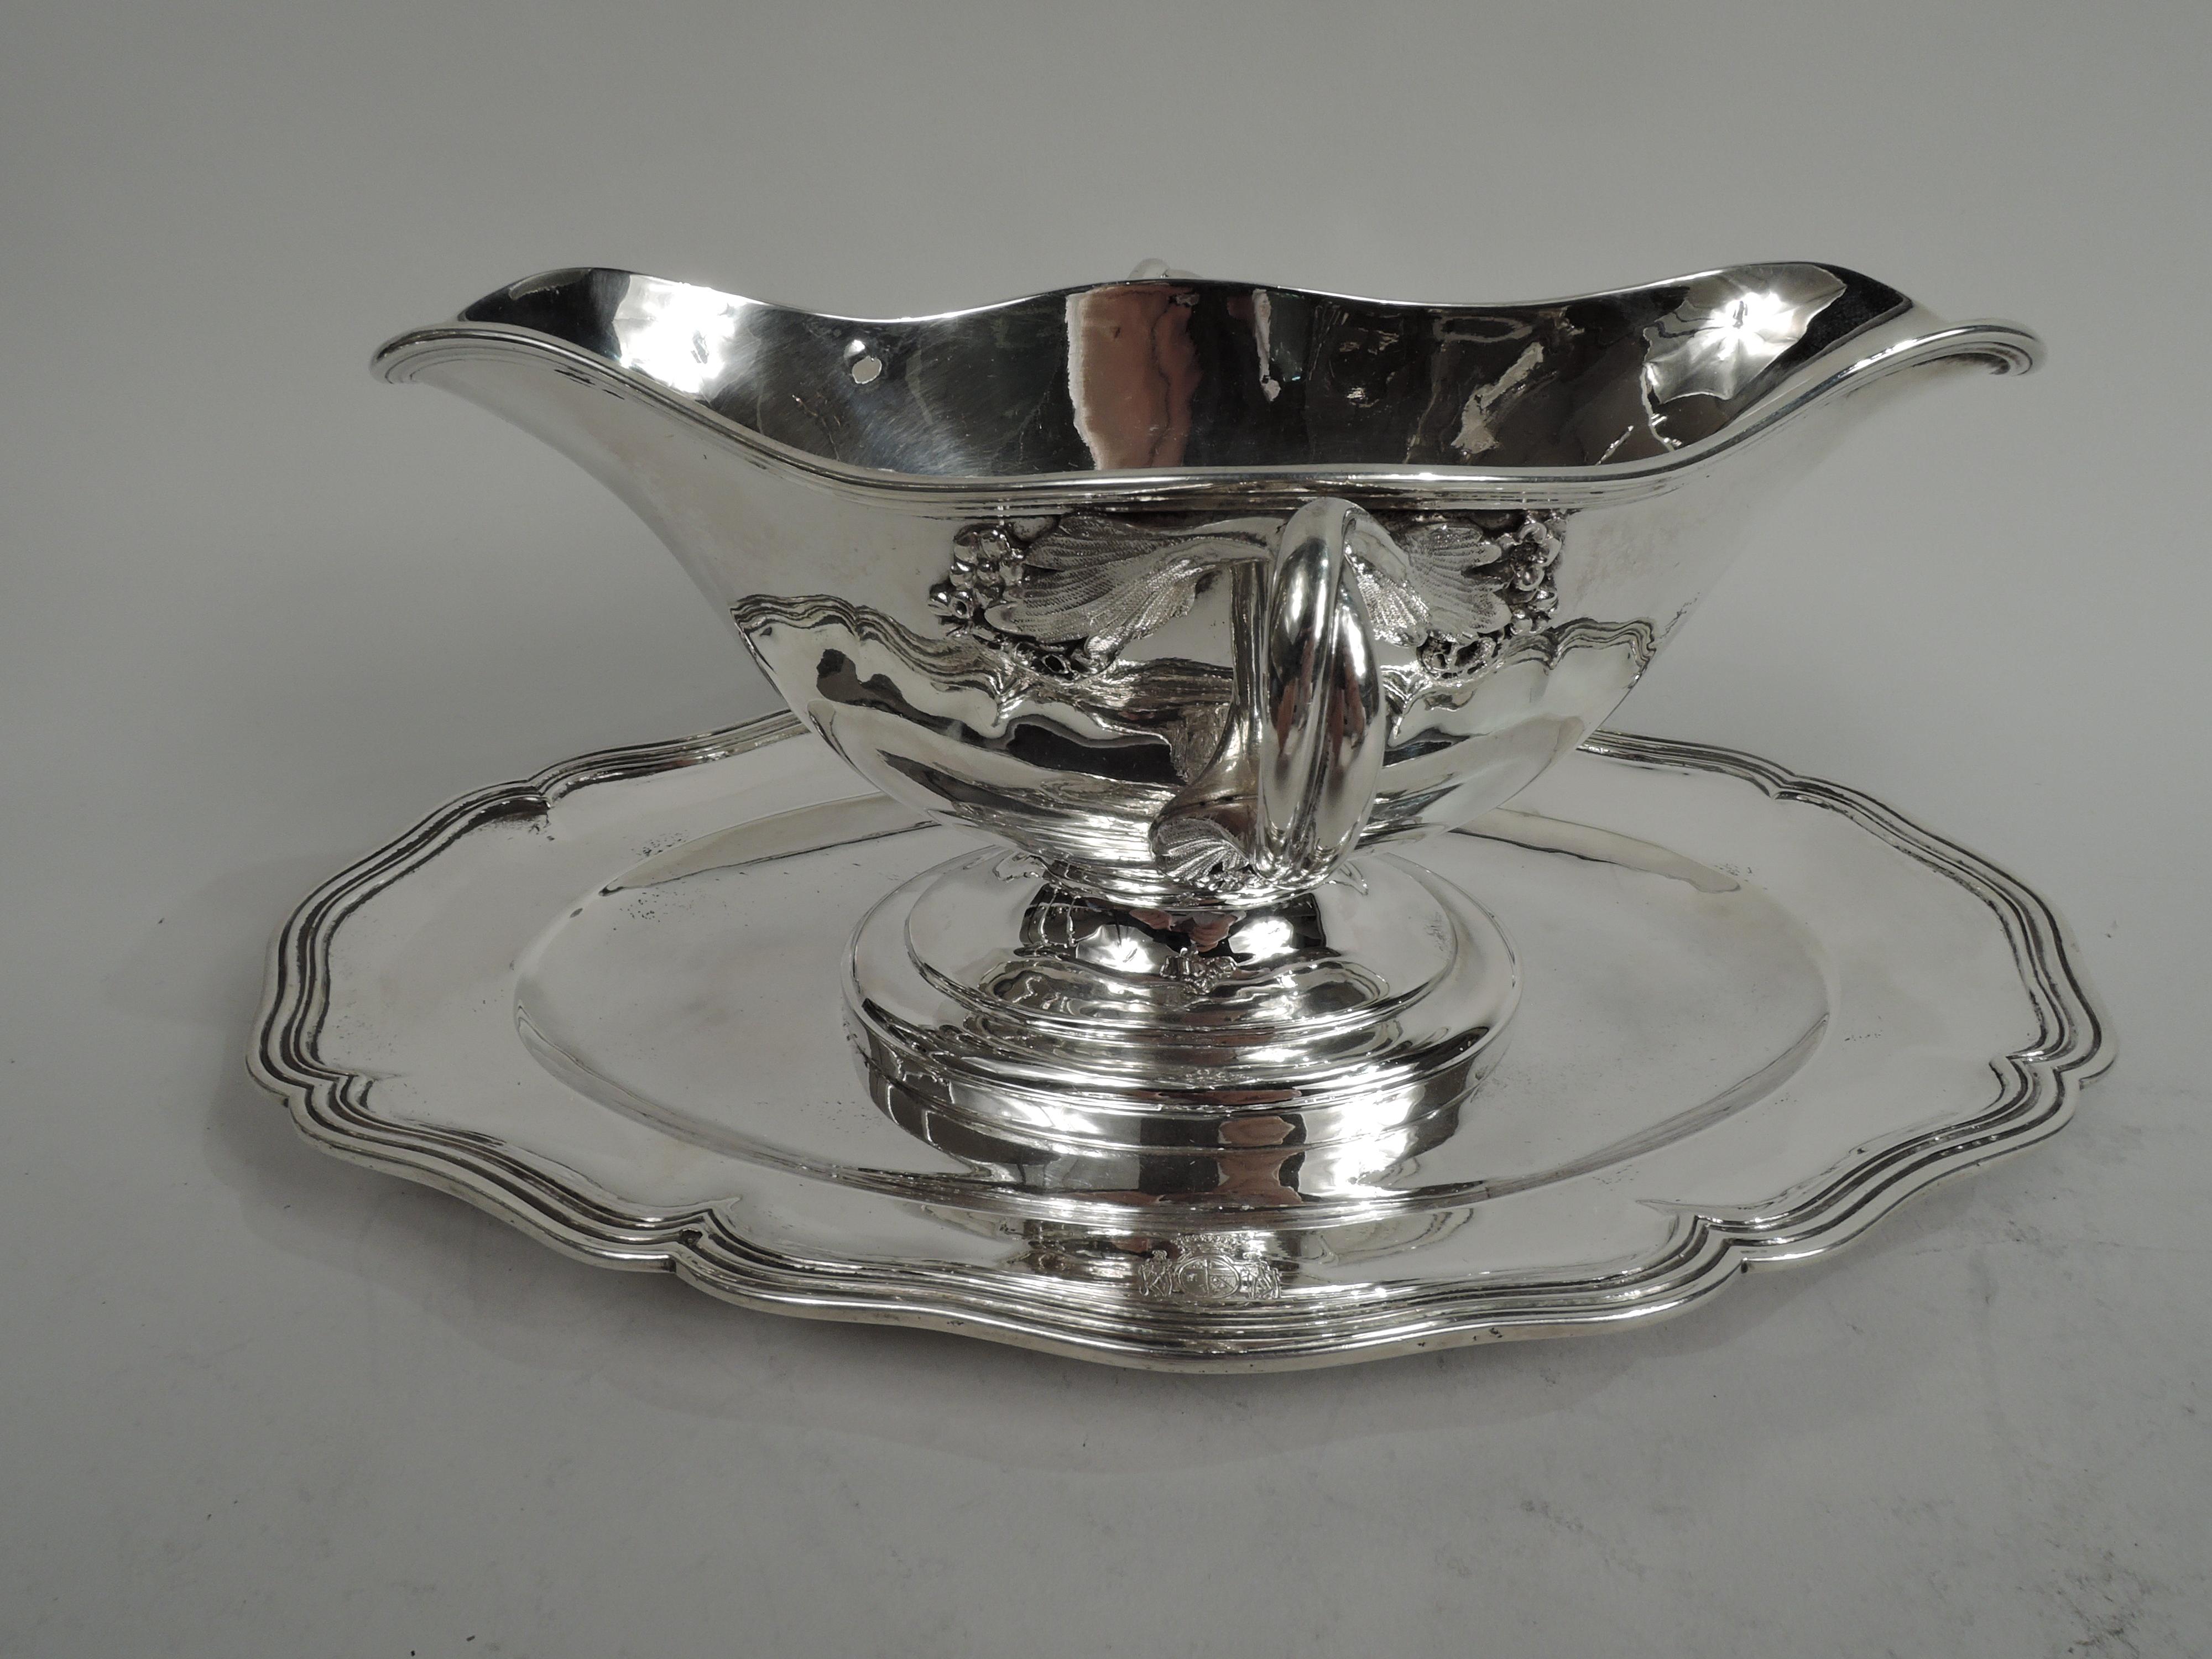 Turn-of-the-century French Belle Epoque Classical 950 silver gravy boat on stand. Oval bowl with curved sides and elongated end spouts. Side handles entwined and split-mounted with leaves and flowers. Stepped oval foot mounted to stand with oval